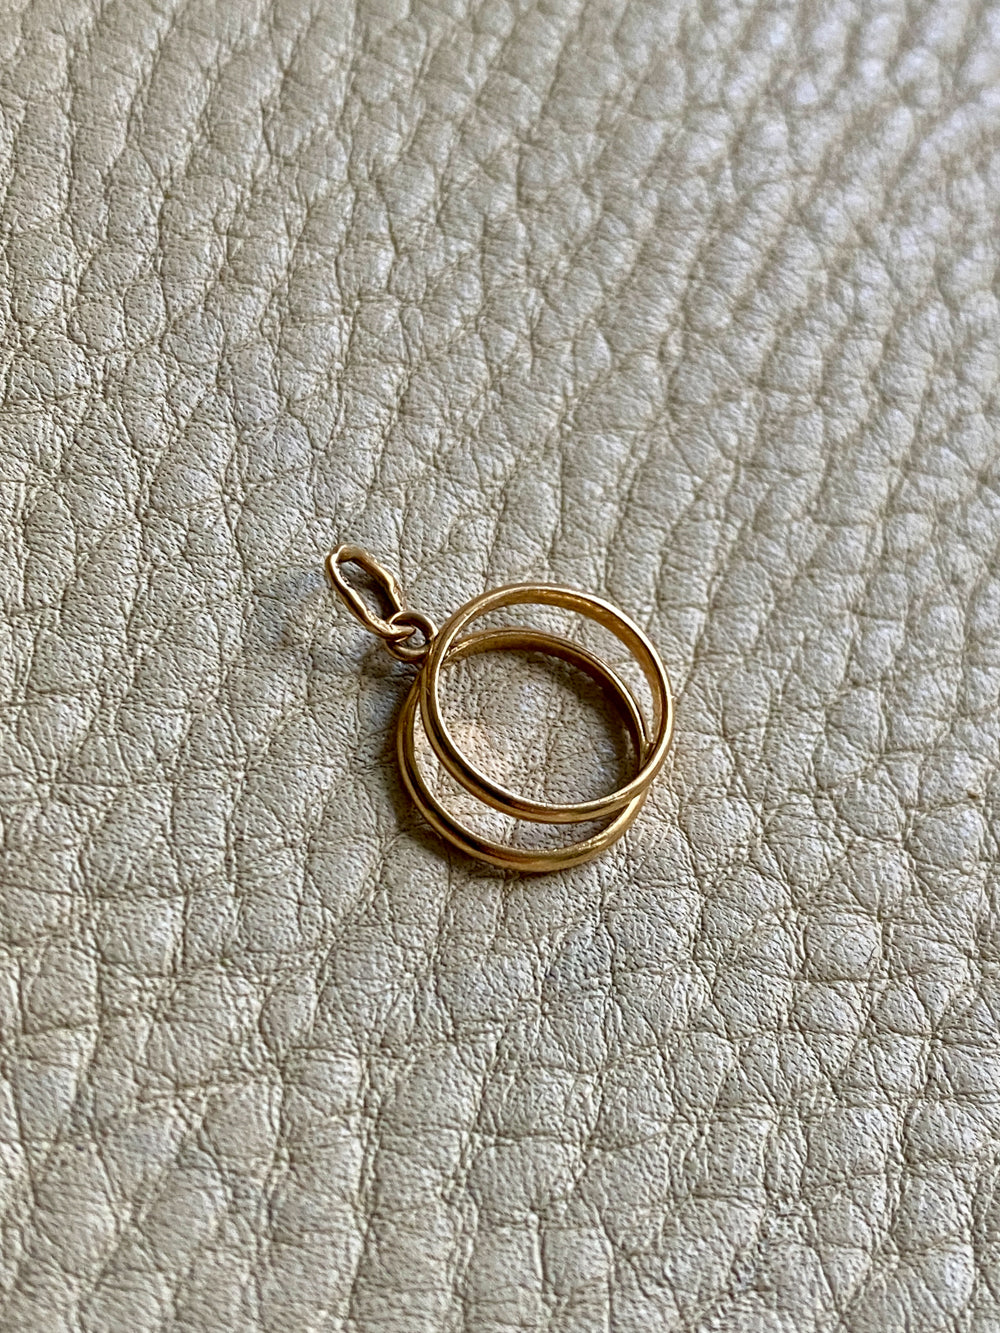 18k gold double ring pendant or charm